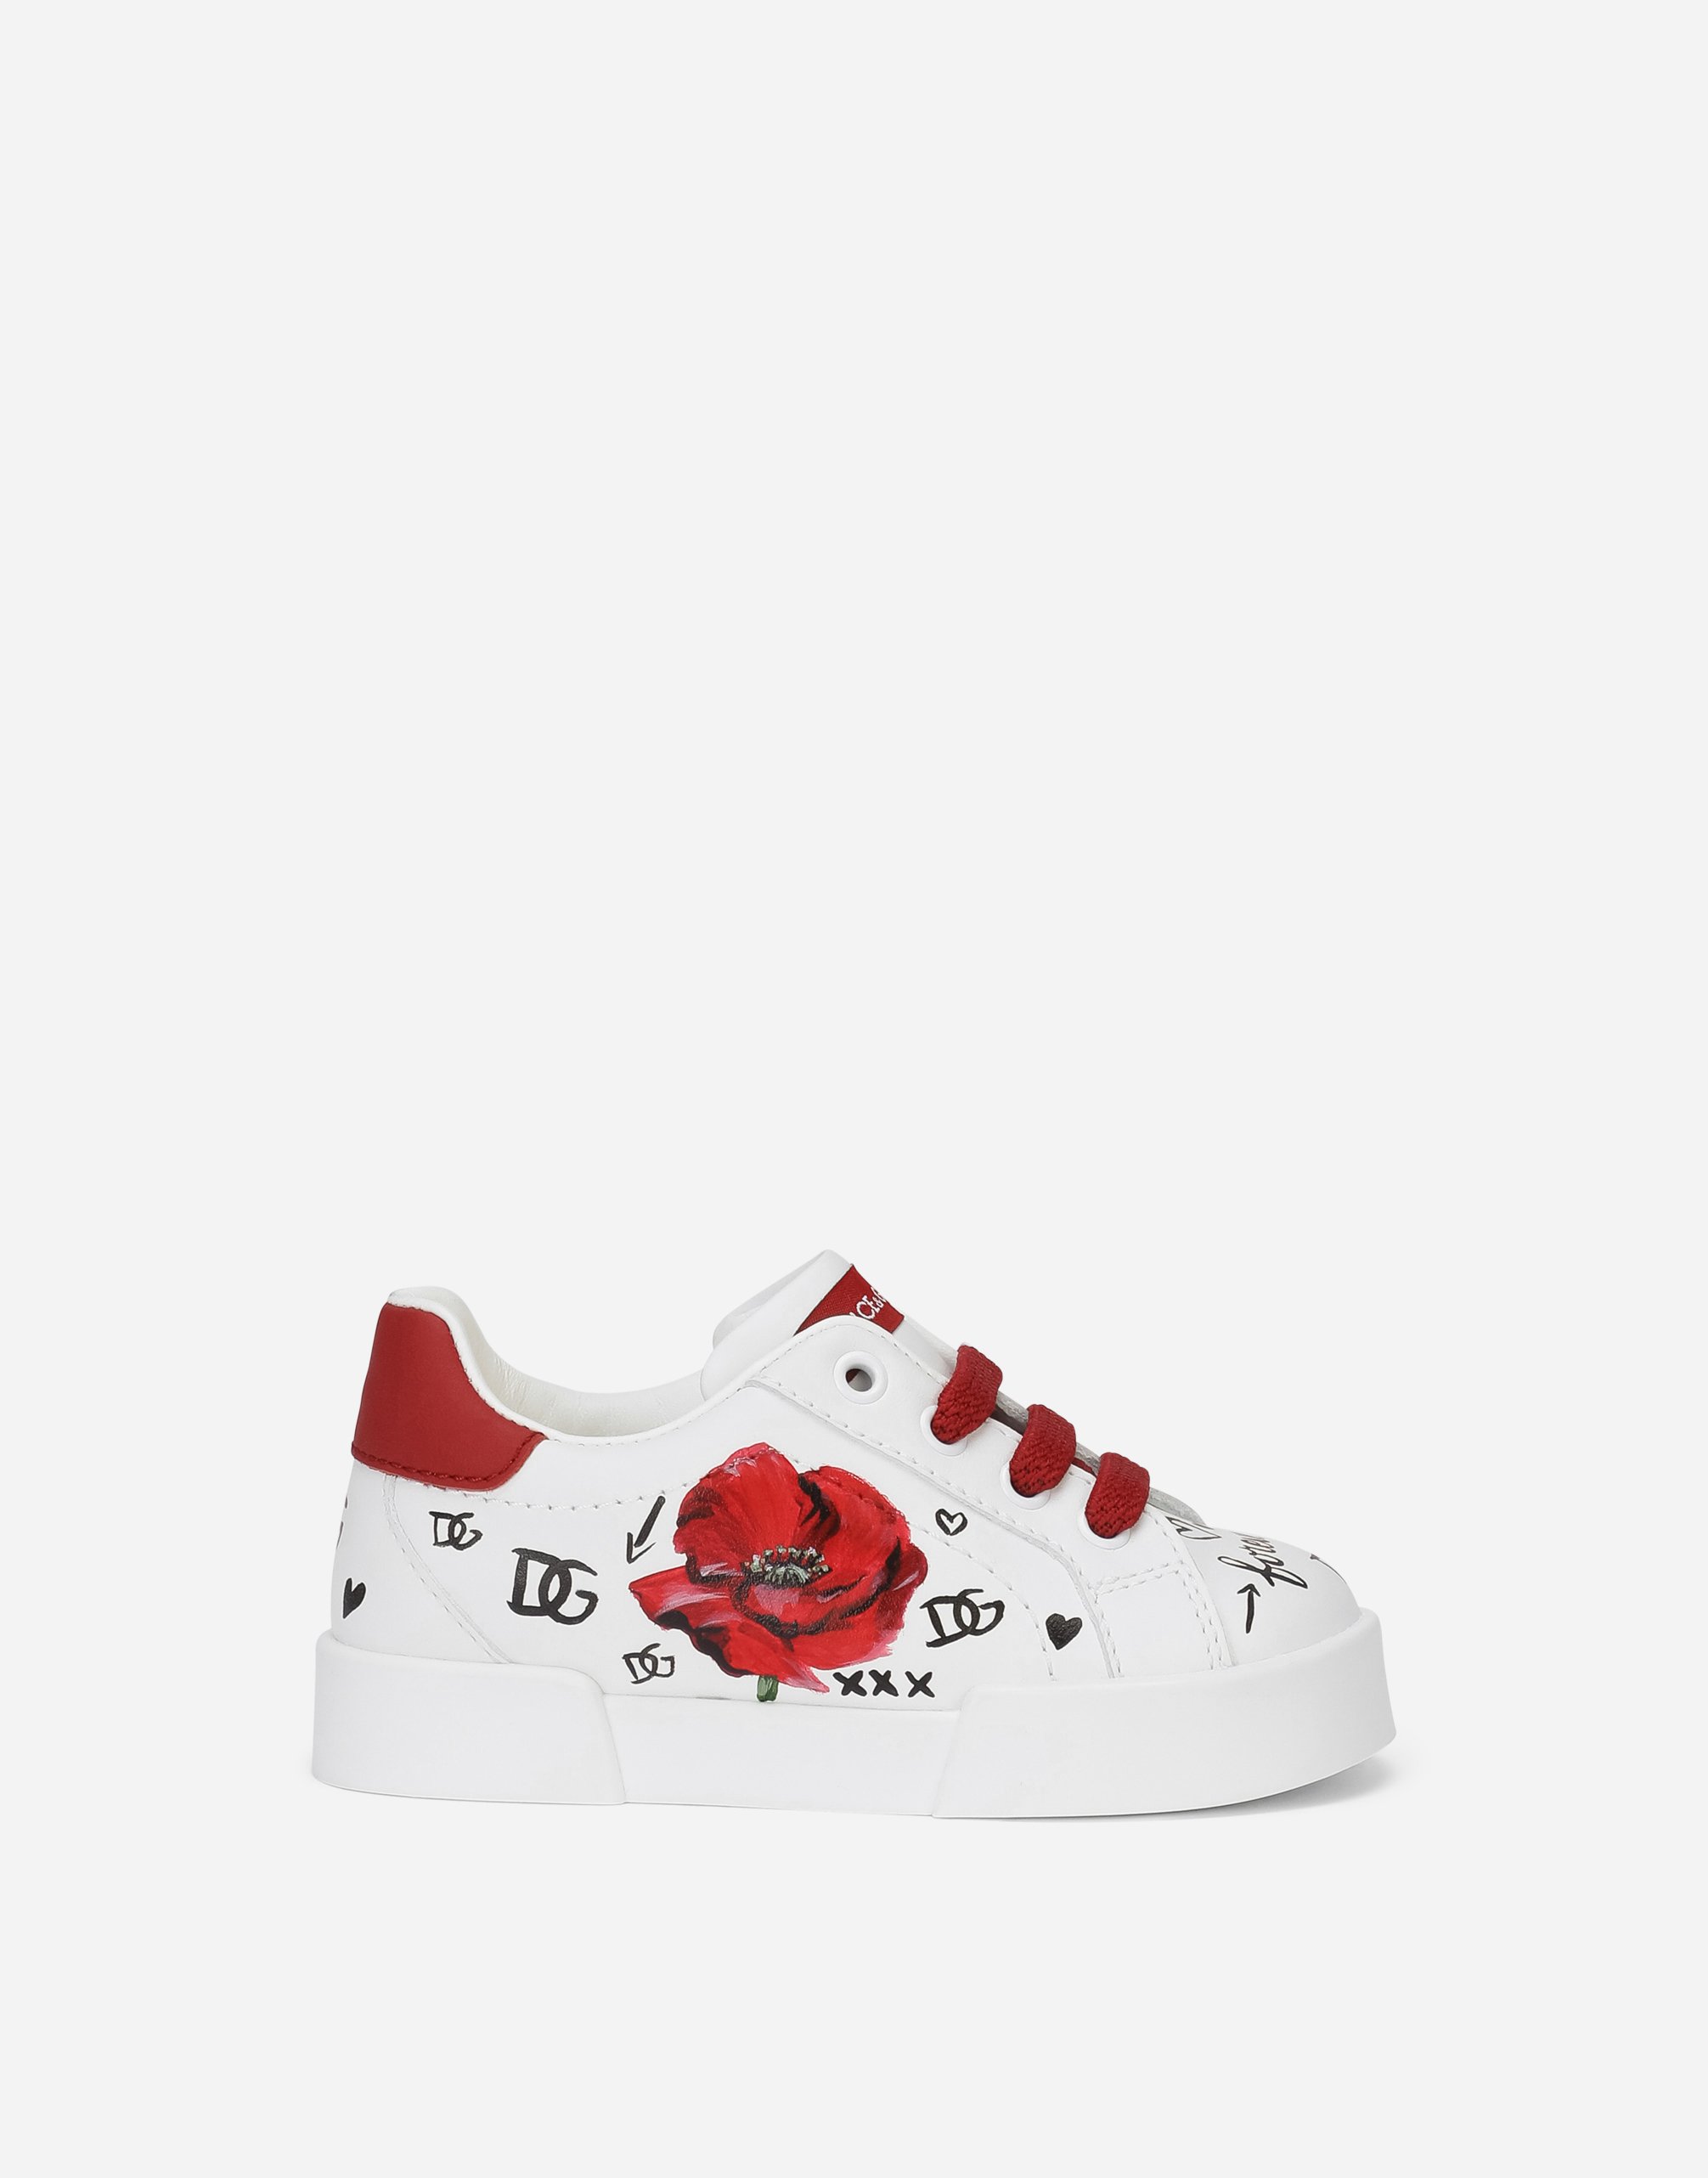 Dolce & Gabbana Babies' First Steps Portofino Light Trainers With Poppy Print In Multicolor